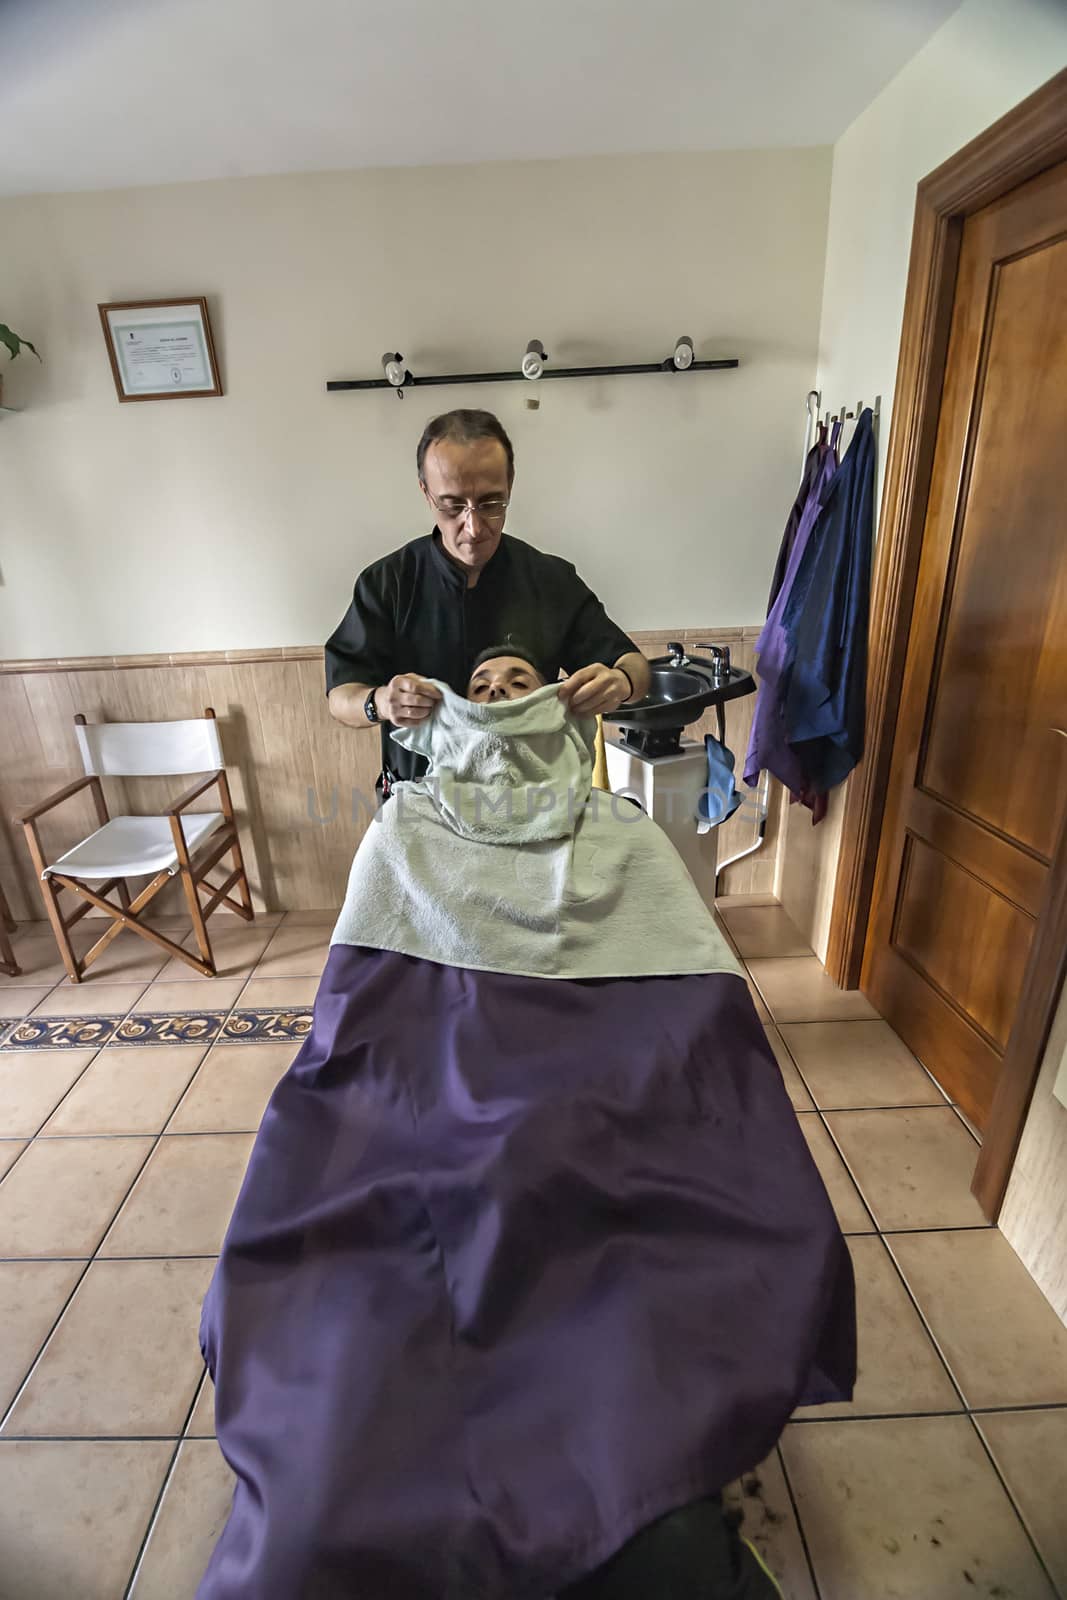 barber applies a hot water cloth in the face of the client to relax the skin in a barber's shop, Sabiote, Jaen province, Andalucia, Spain